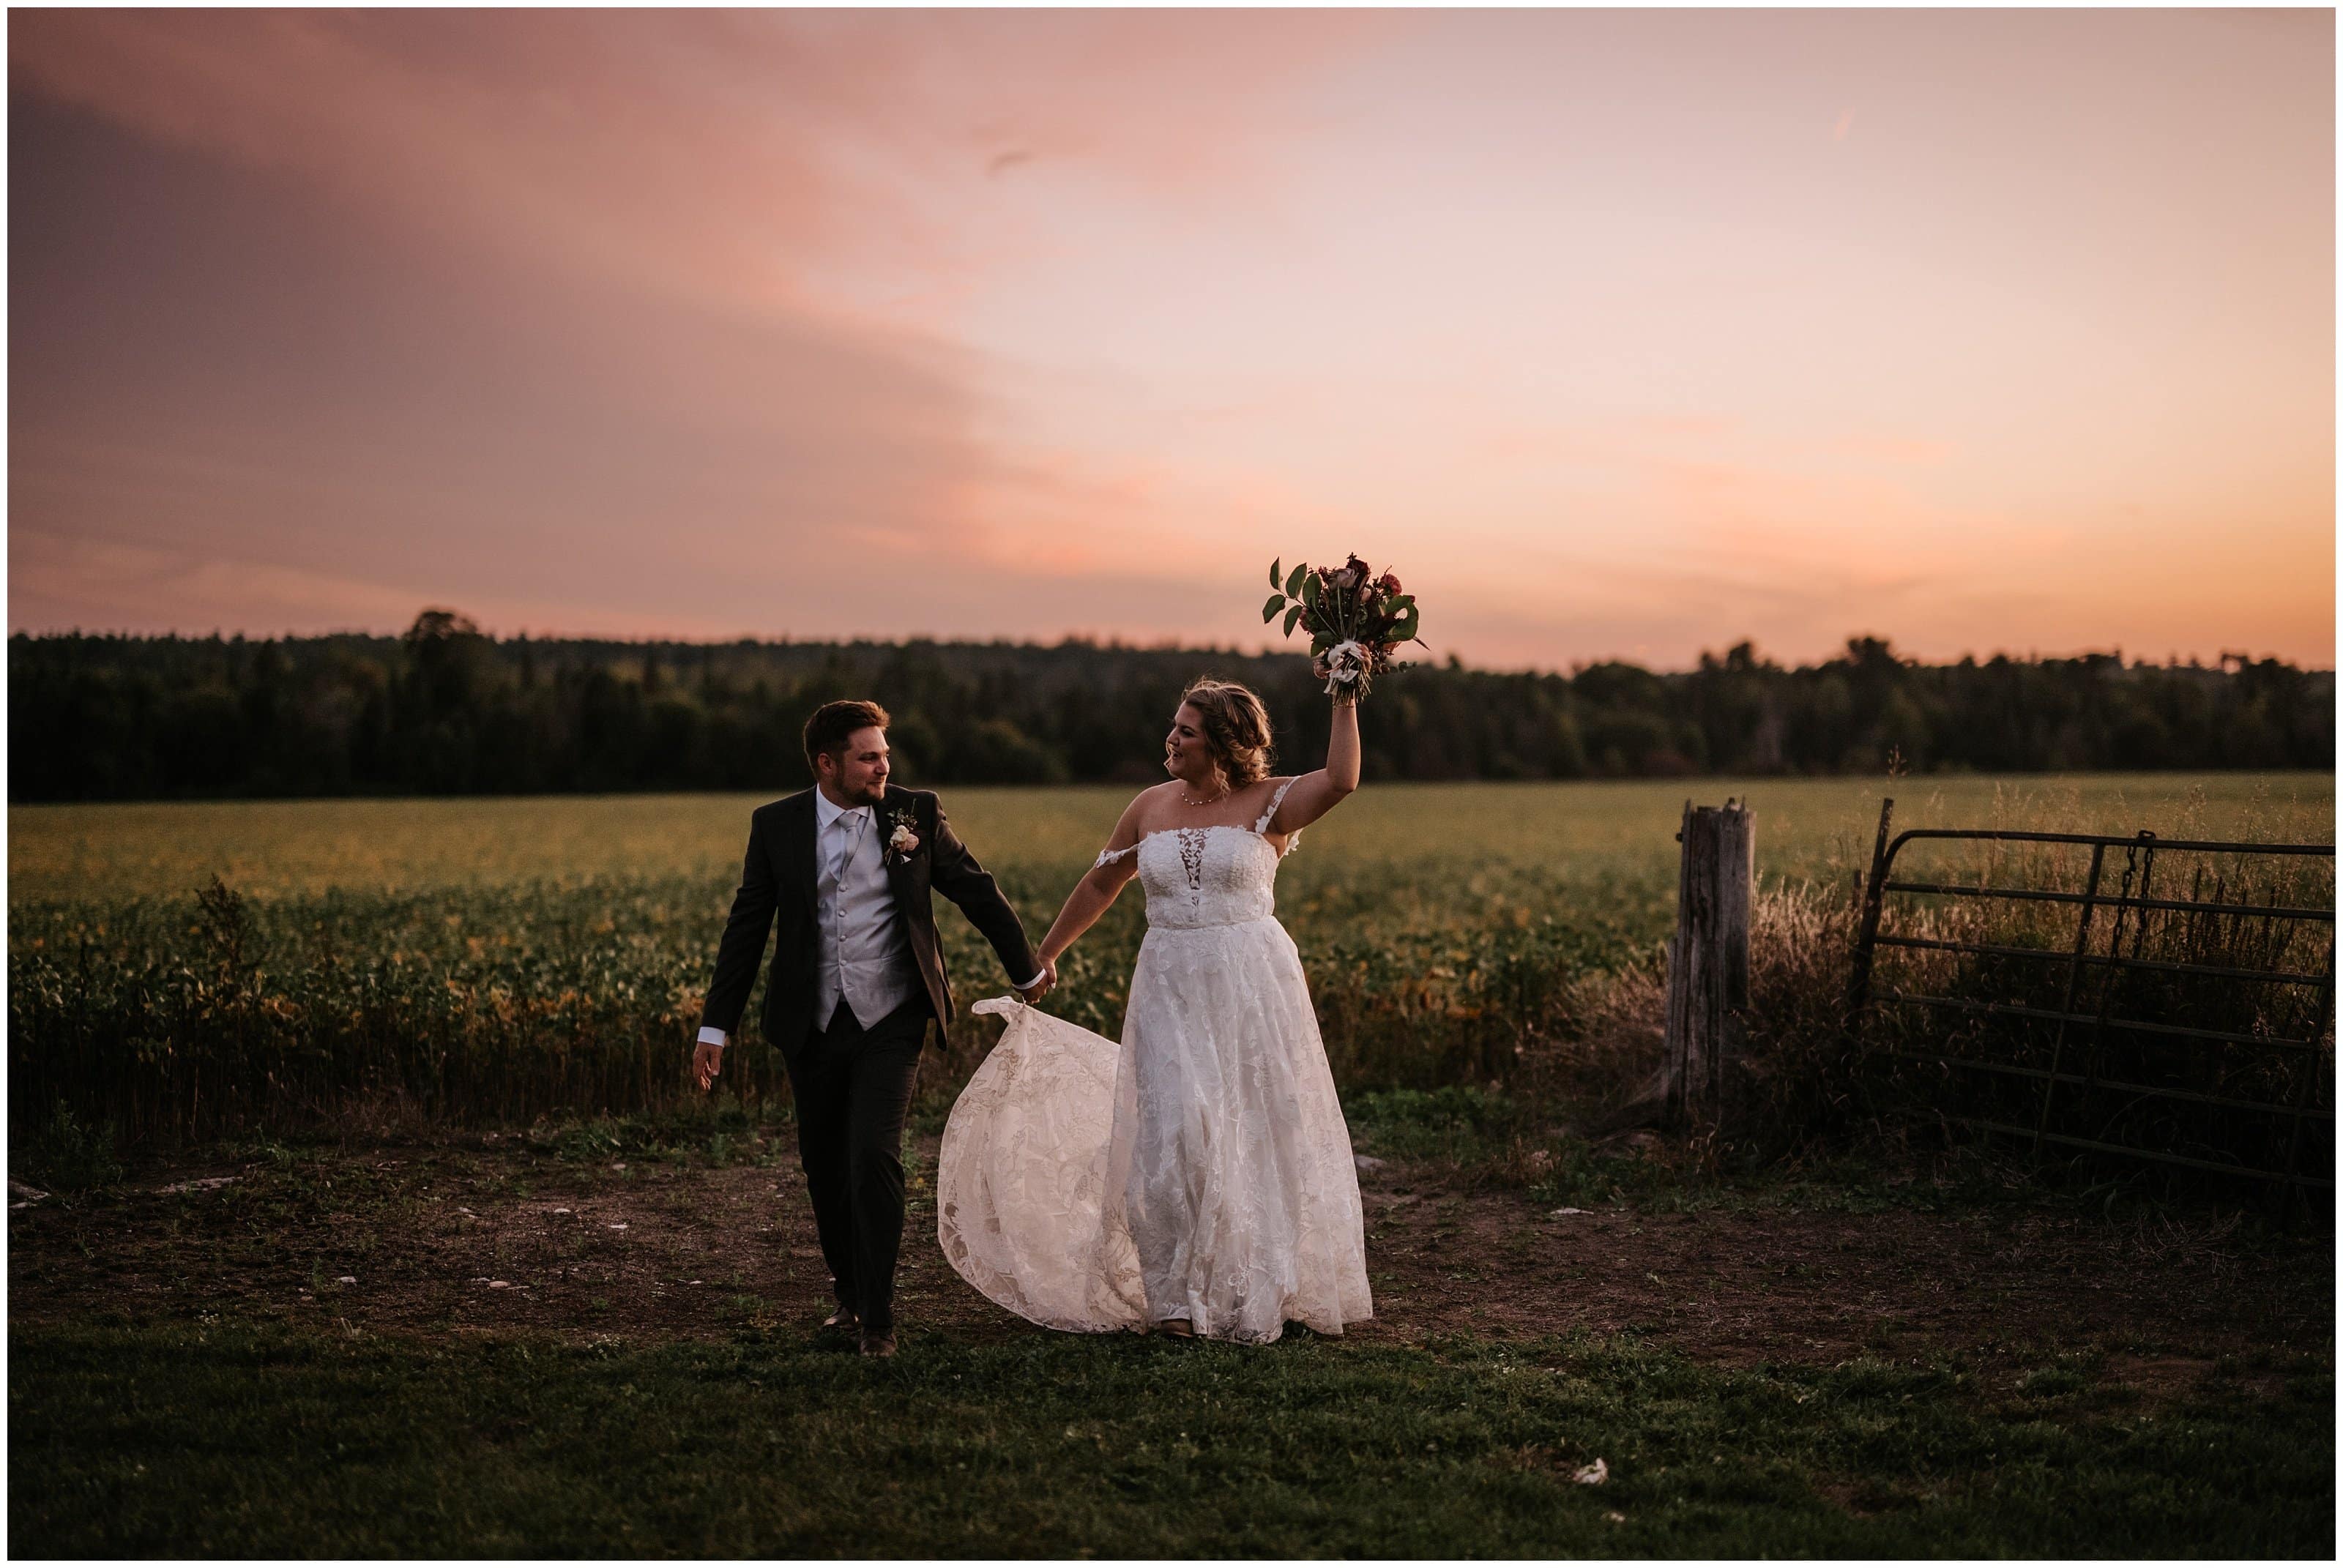 A bride and groom cheer in a field as the pink sun sets